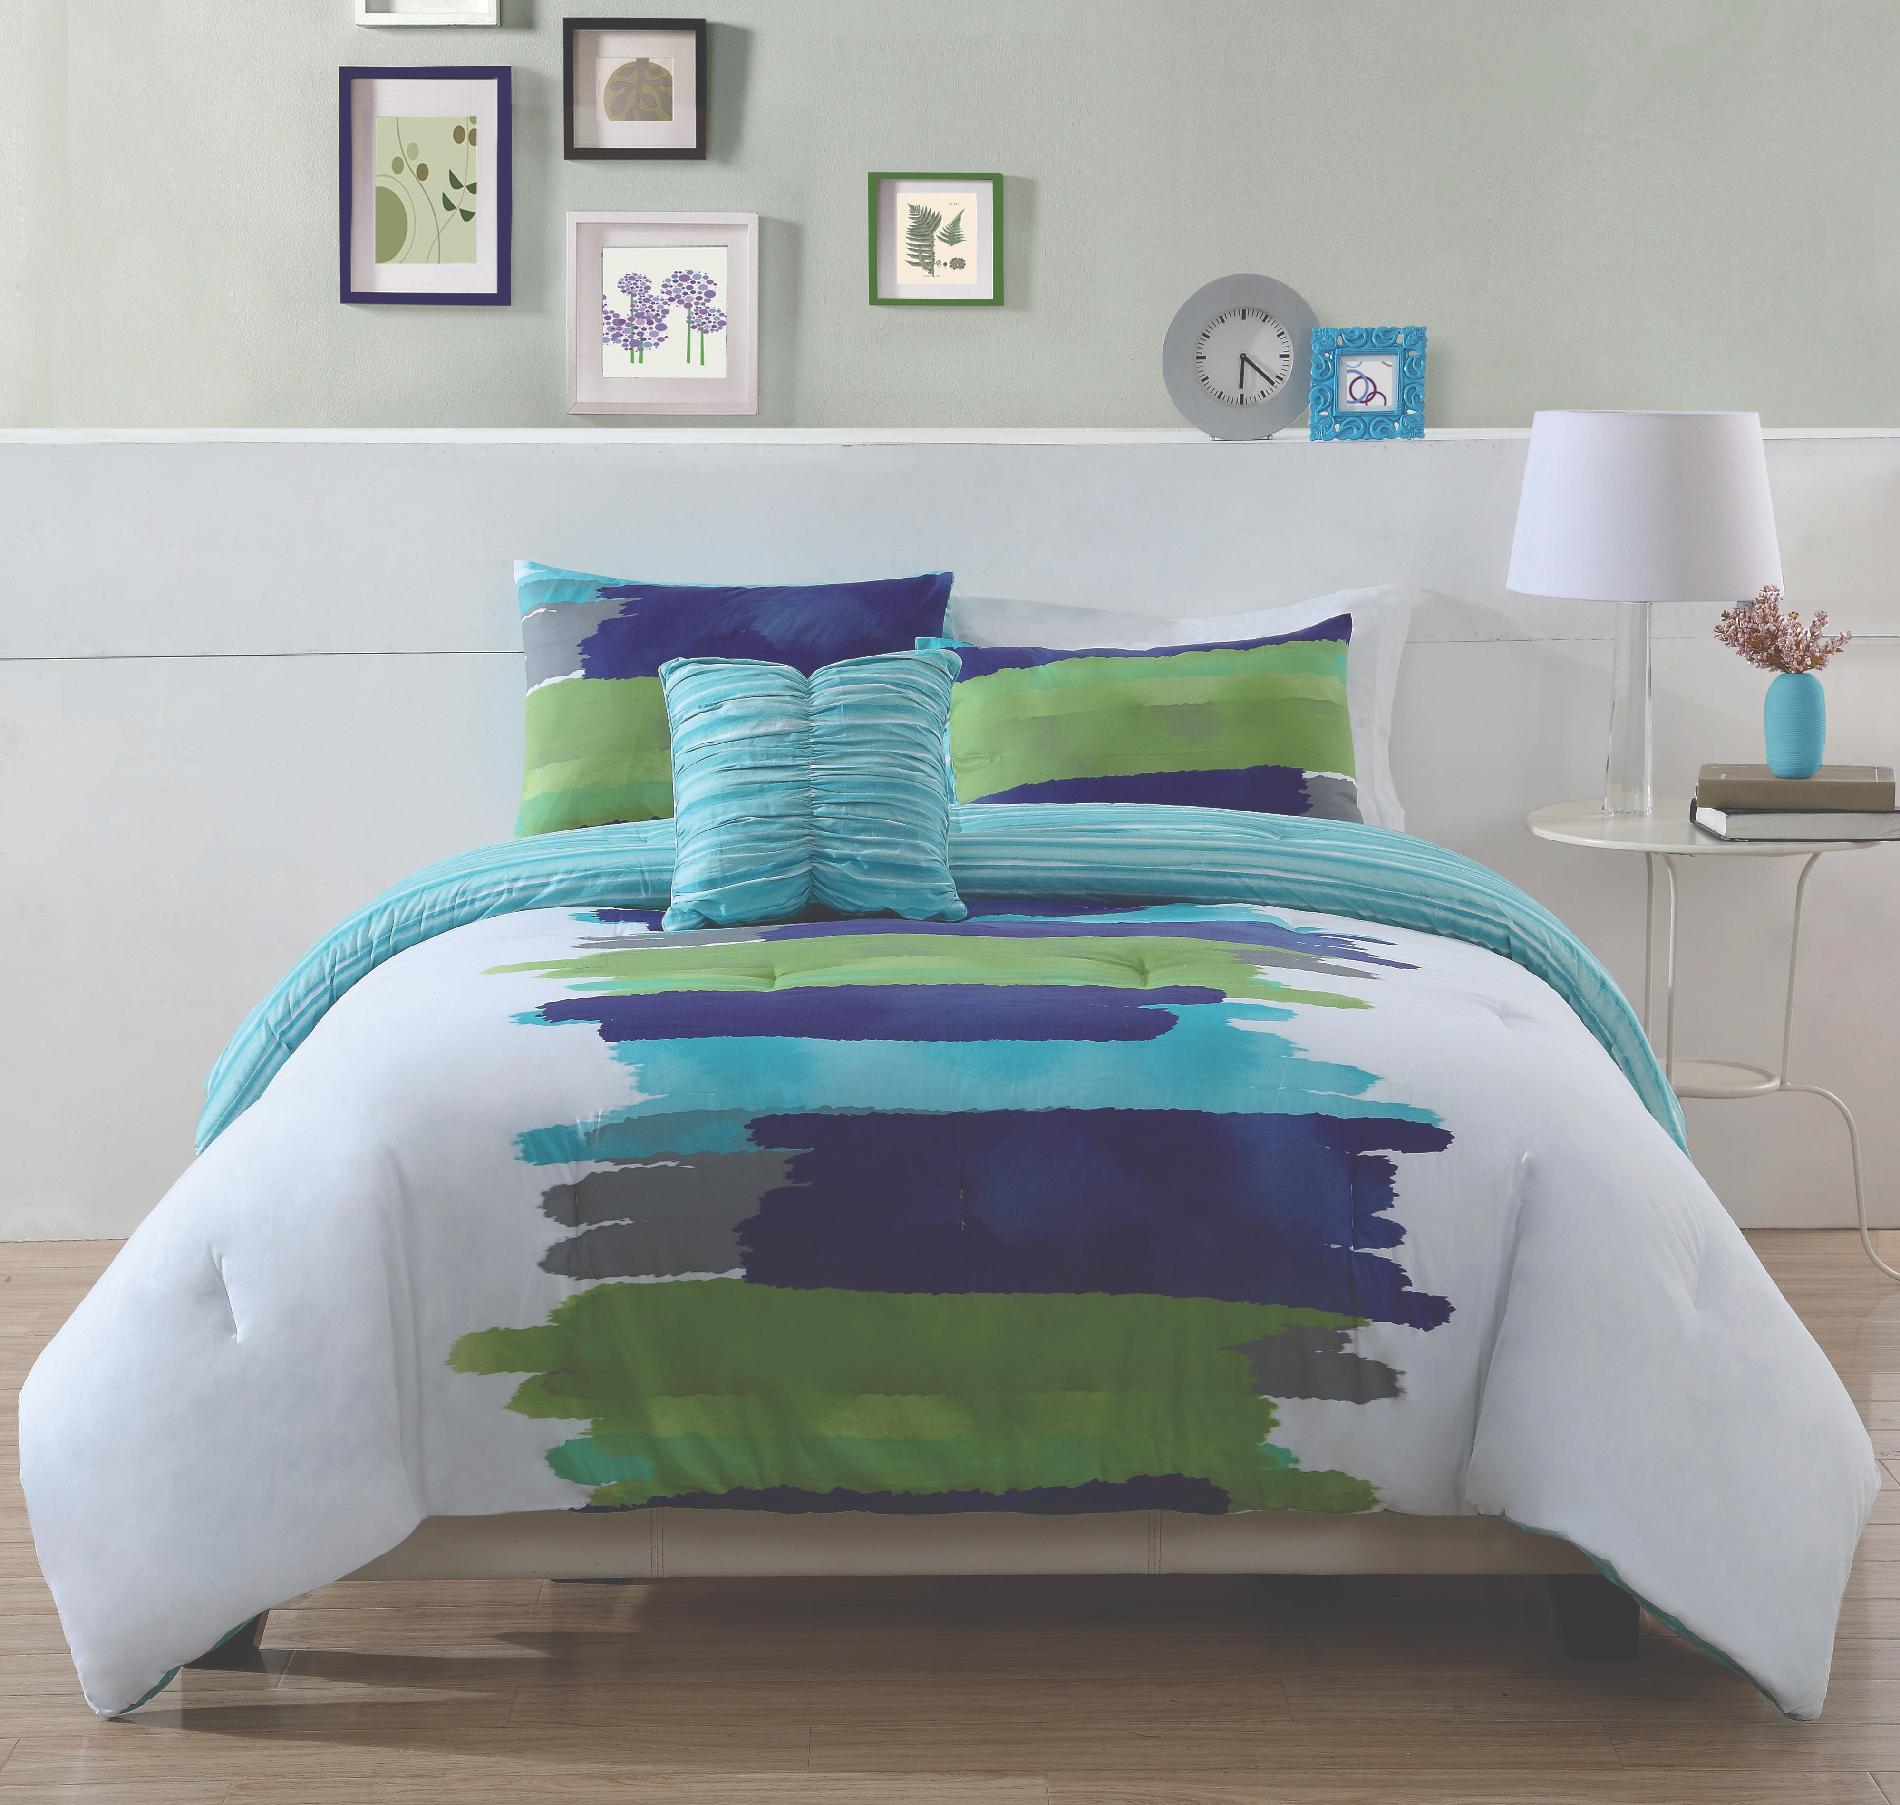 Watercolor Blue Comforter Set with Sham(s)